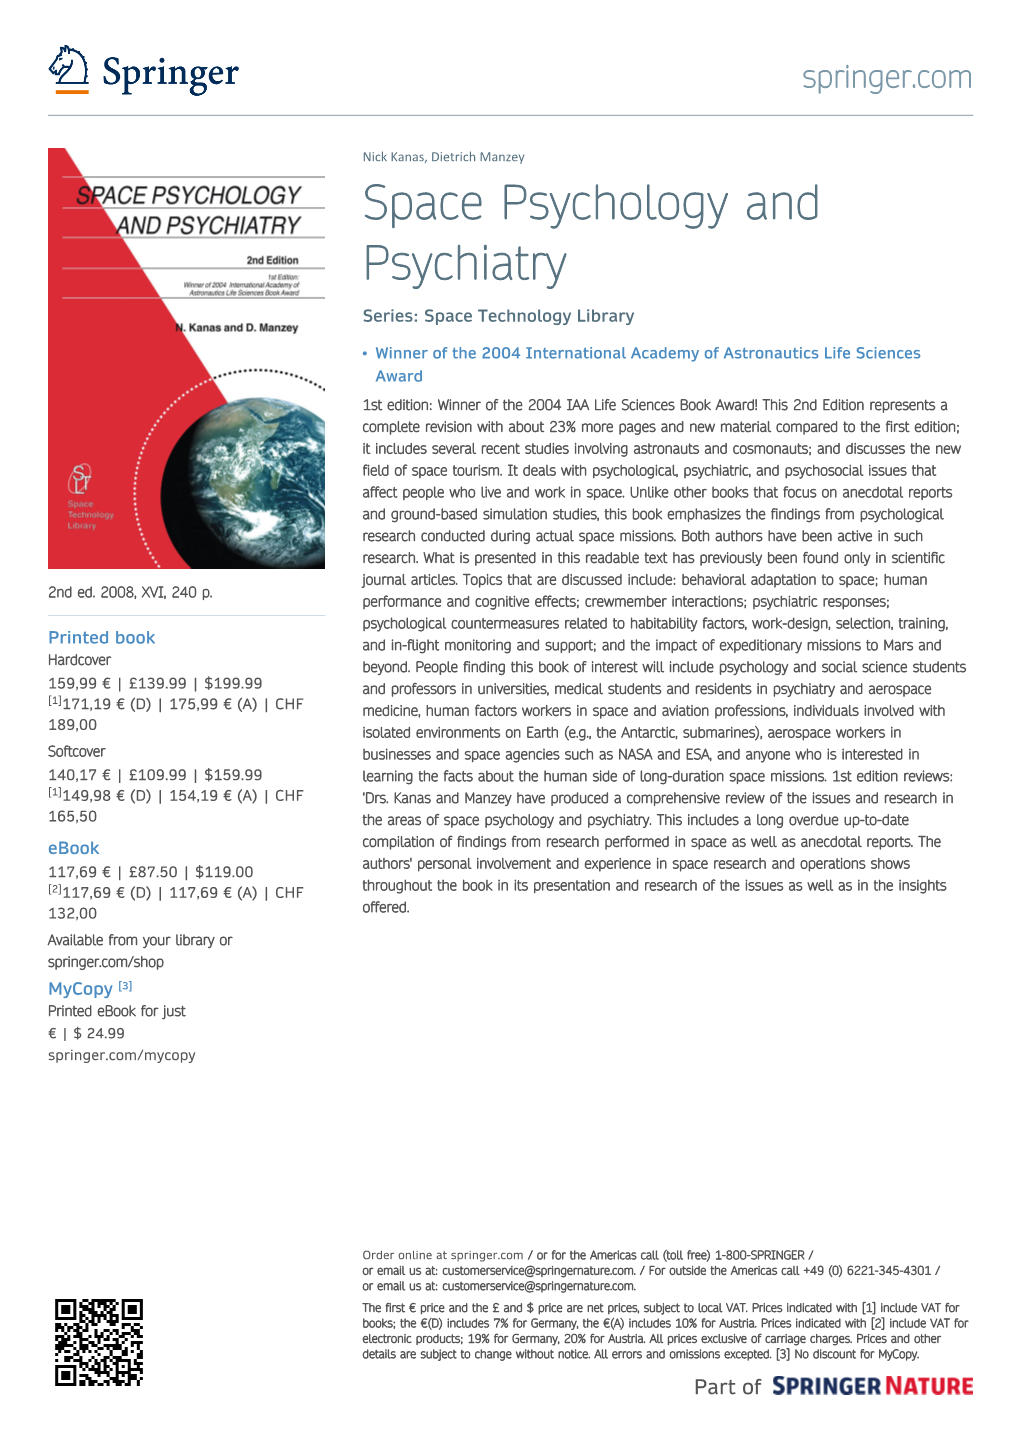 Space Psychology and Psychiatry Series: Space Technology Library